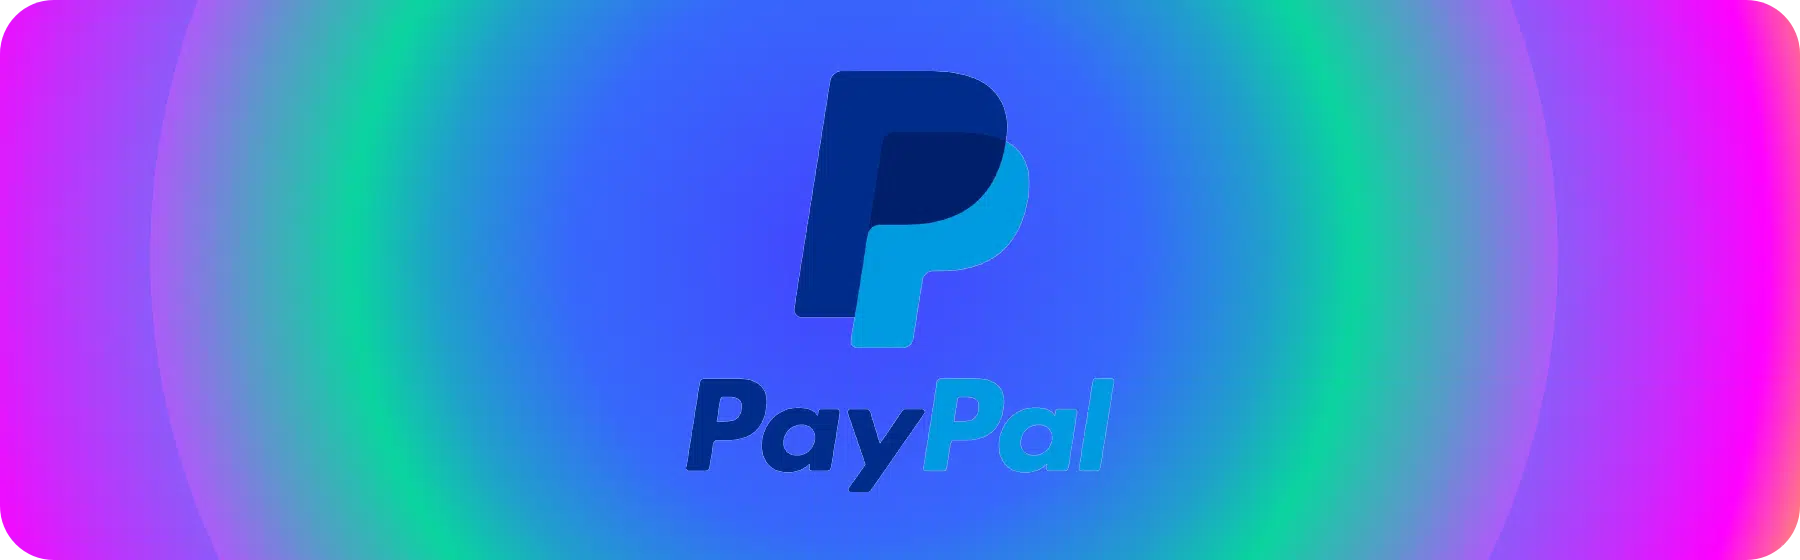 paypal as payment method logo